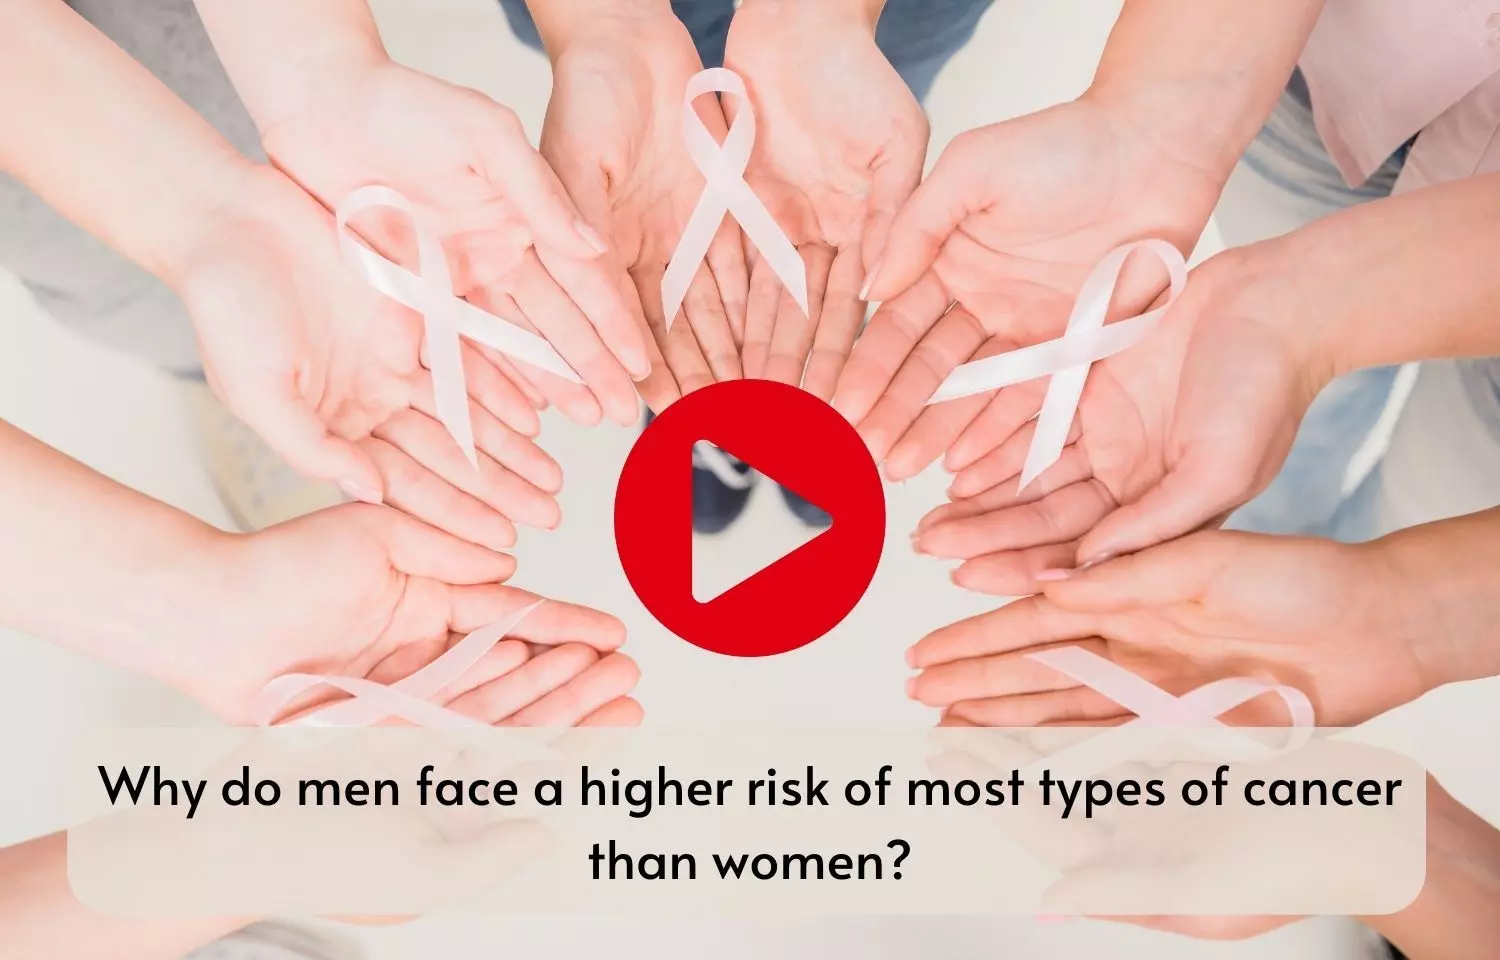 Why do men face a higher risk of most types of cancer than women?